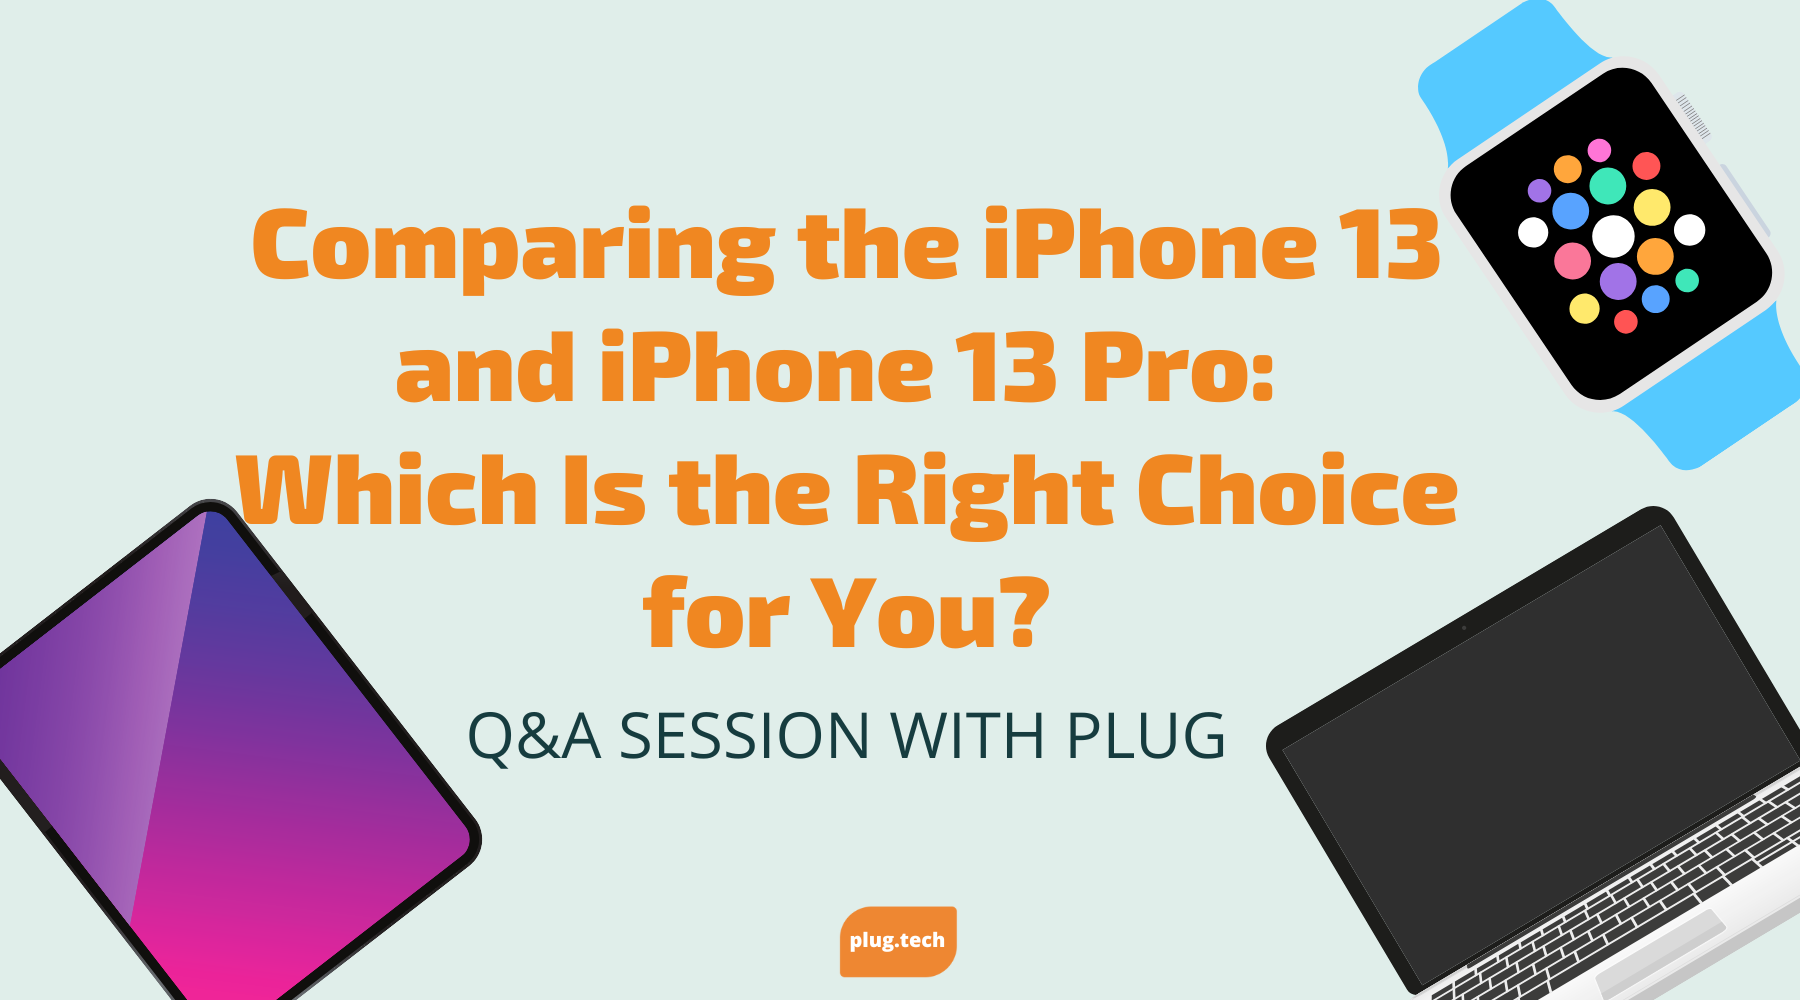 Comparing the iPhone 13 and iPhone 13 Pro: Which Is the Right Choice for You?